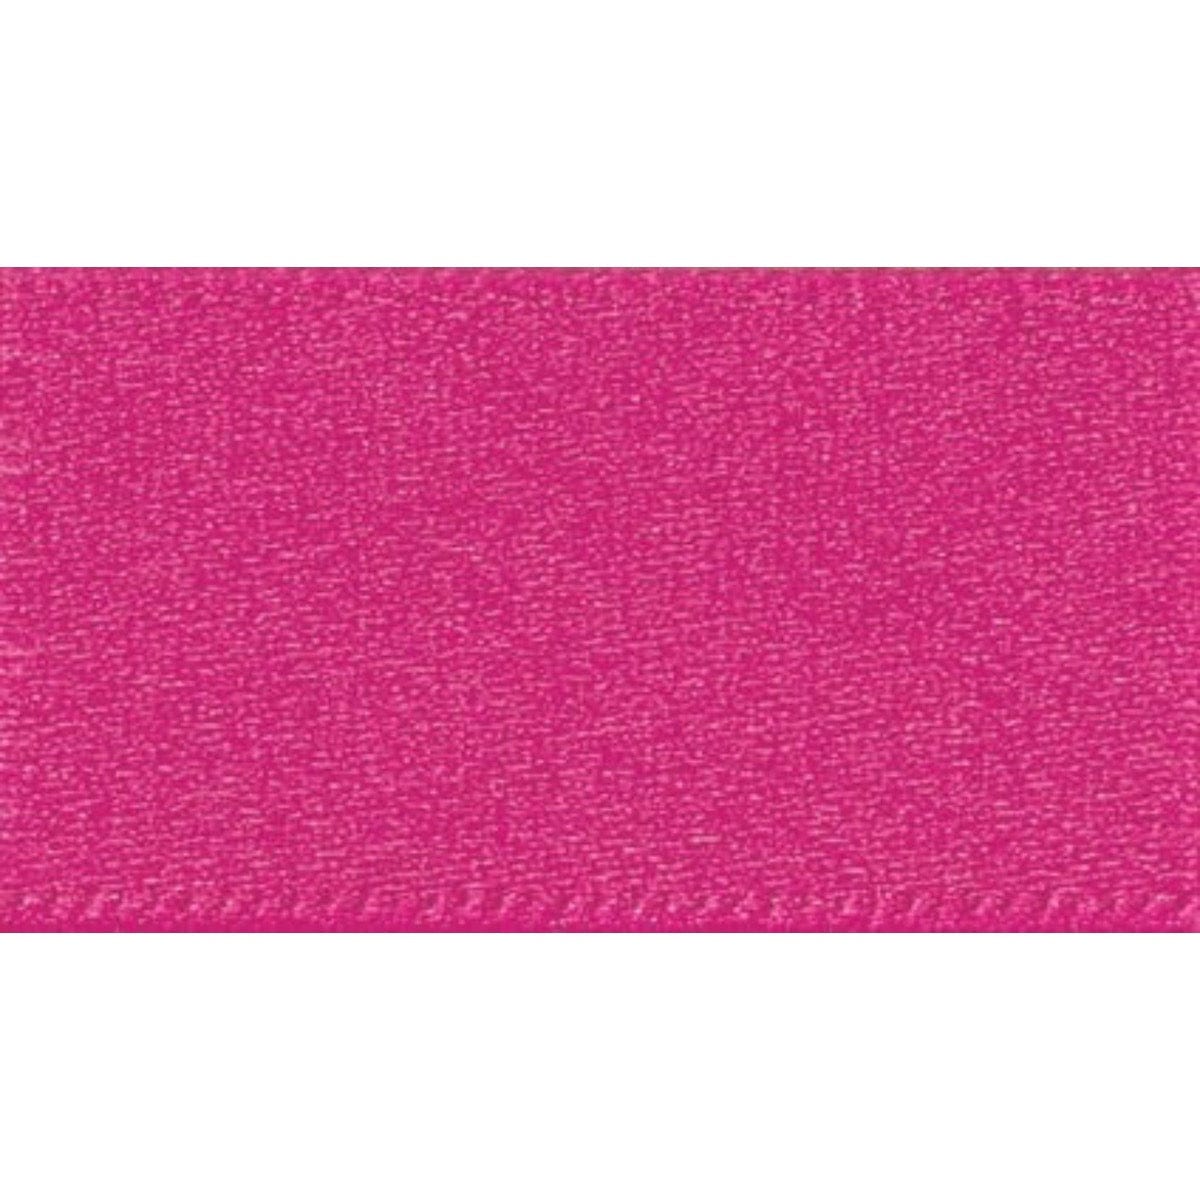 Double Faced Satin Ribbon Fuchsia Pink: 3mm wide. Price per metre.